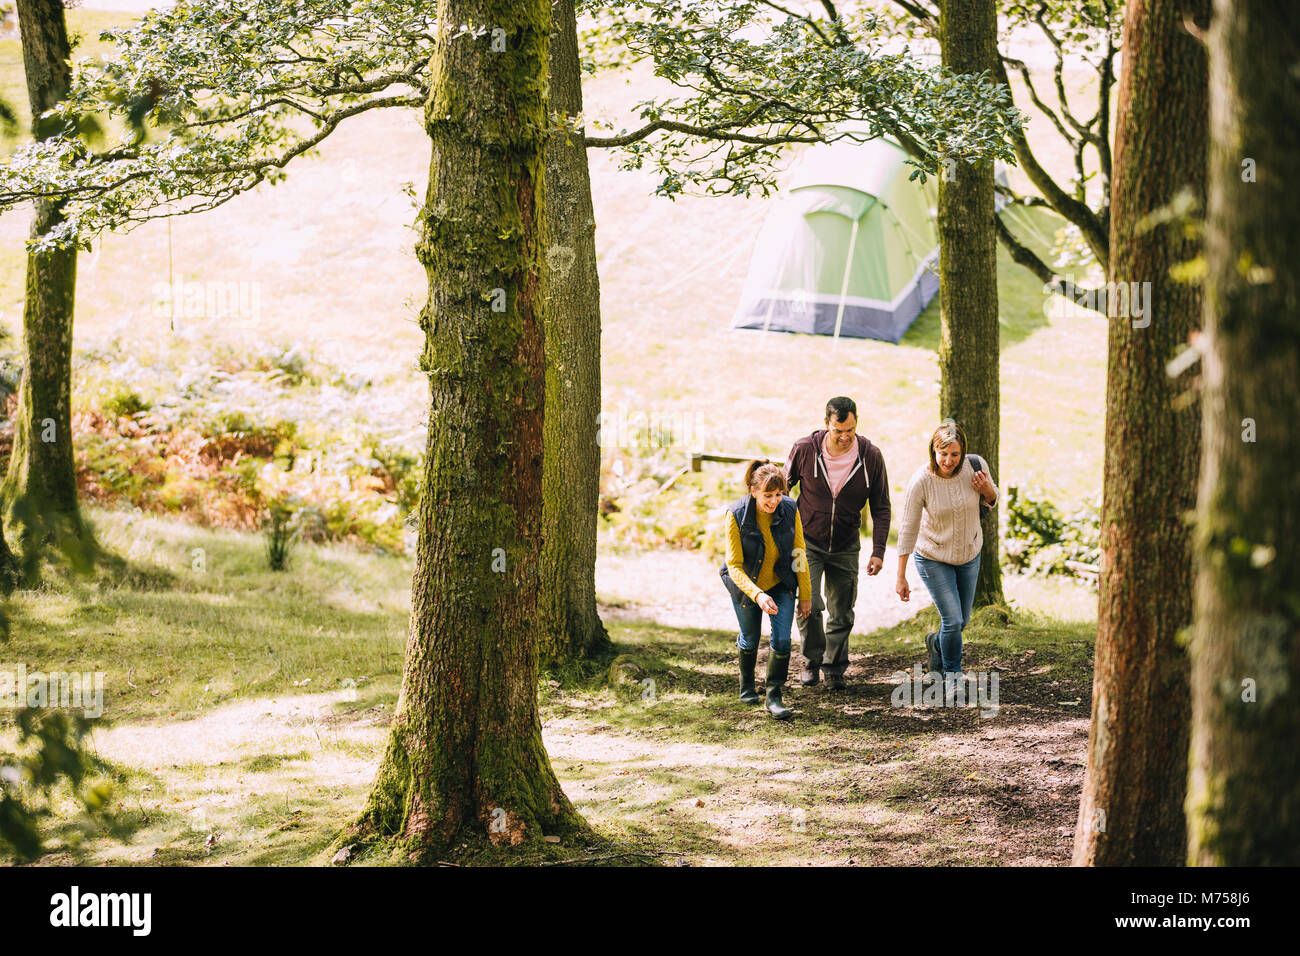 Three mature adults are leaving the campsite to go for a hike together. Stock Photo